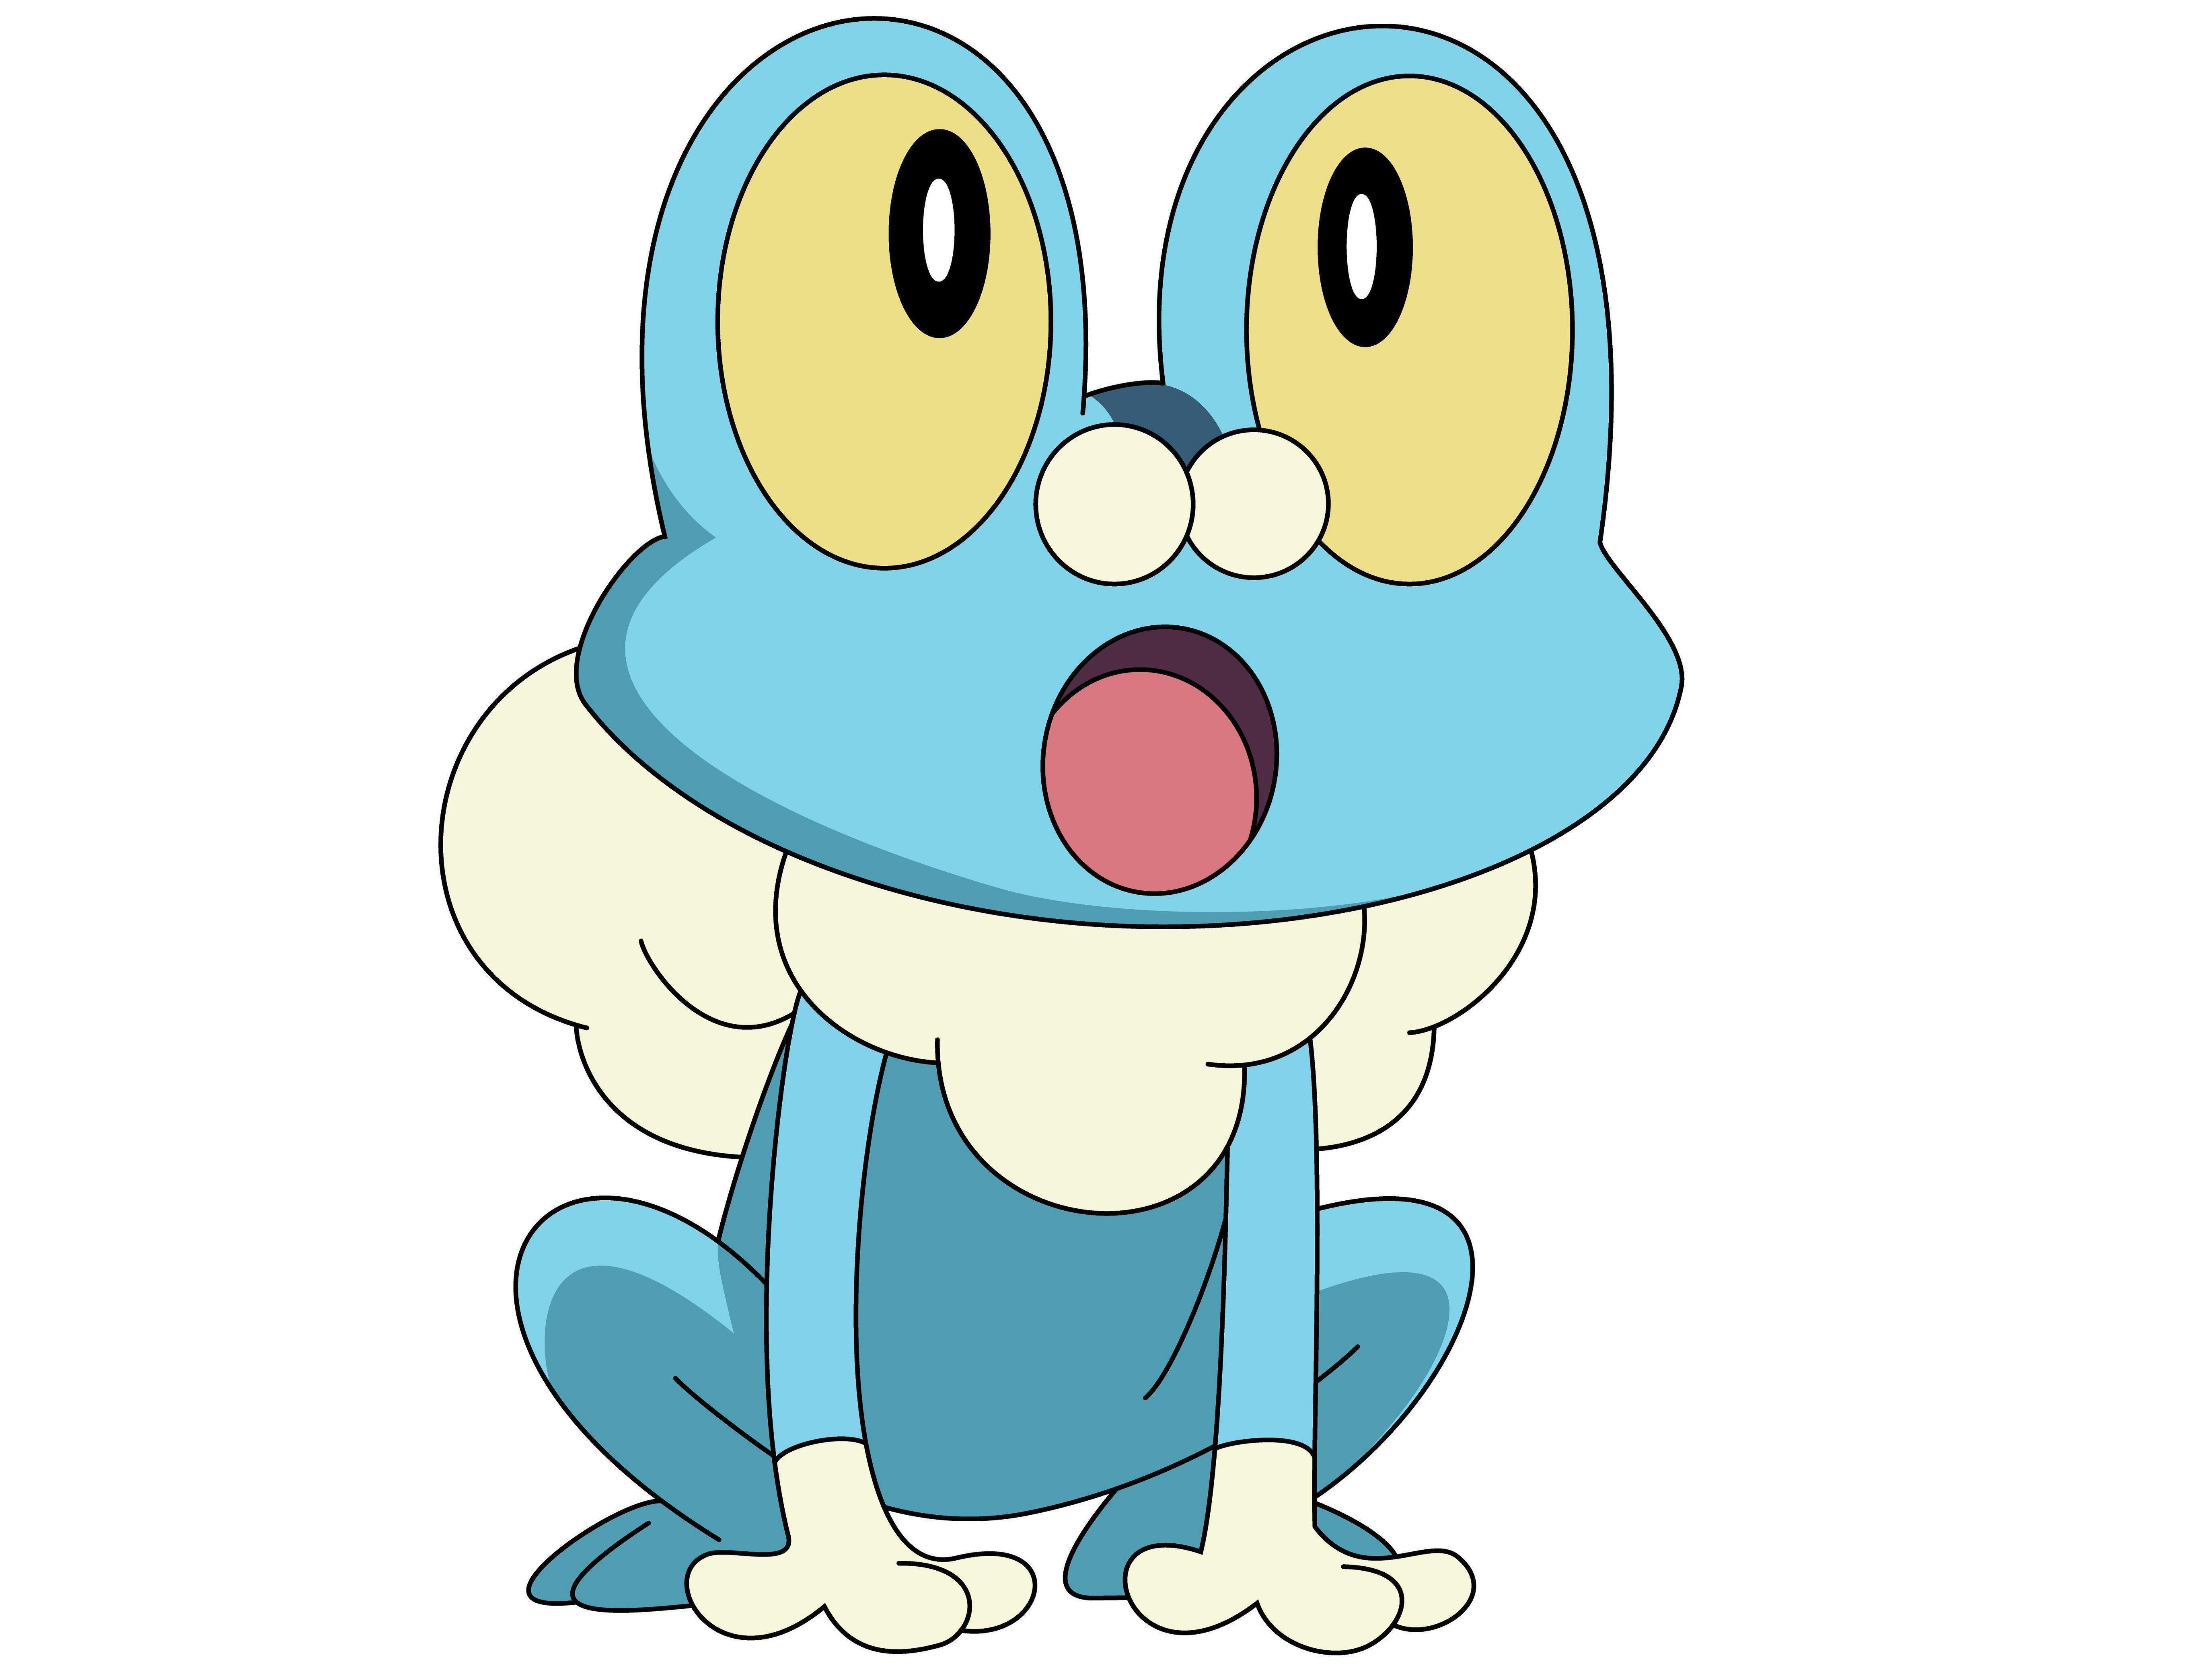 Froakie Wallpaper Image Photo Picture Background